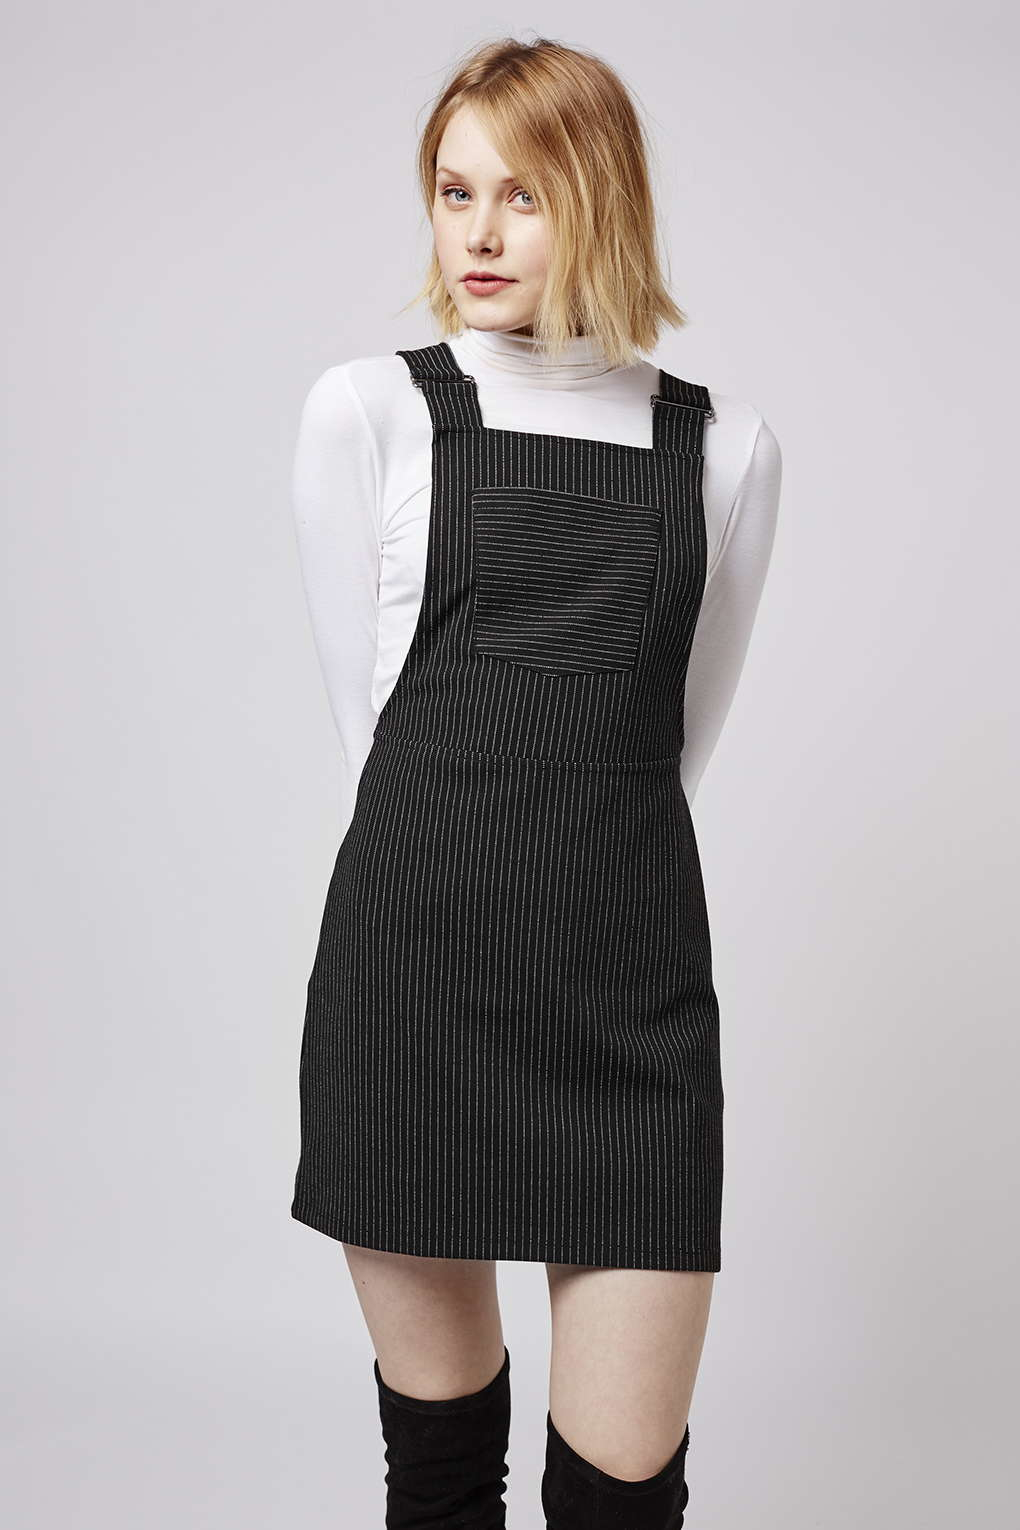 TOPSHOP Striped Pinafore Dress in Black - Lyst